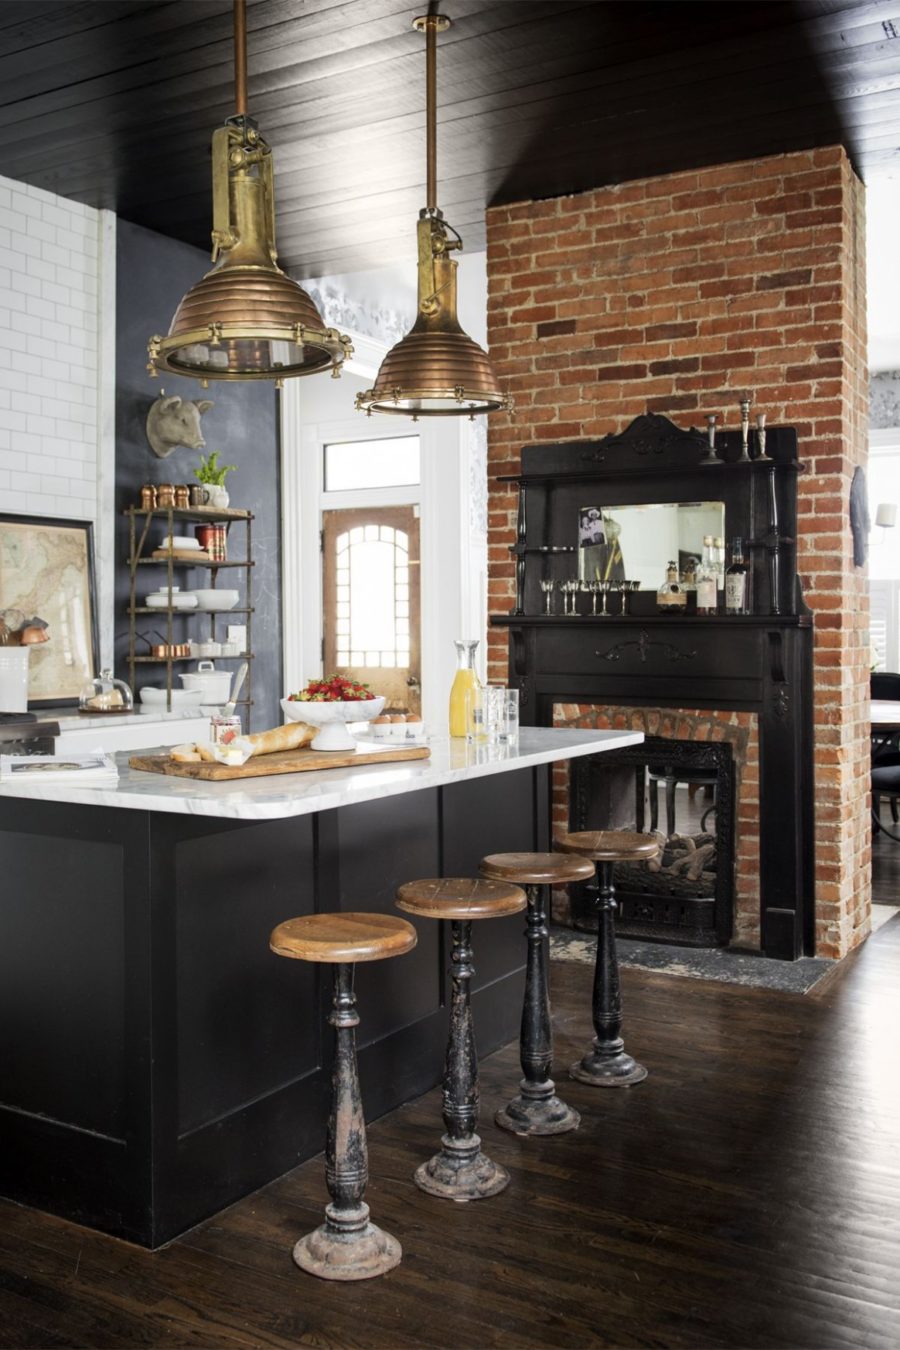 15 Black Kitchen Cabinets That You’ll Swoon For